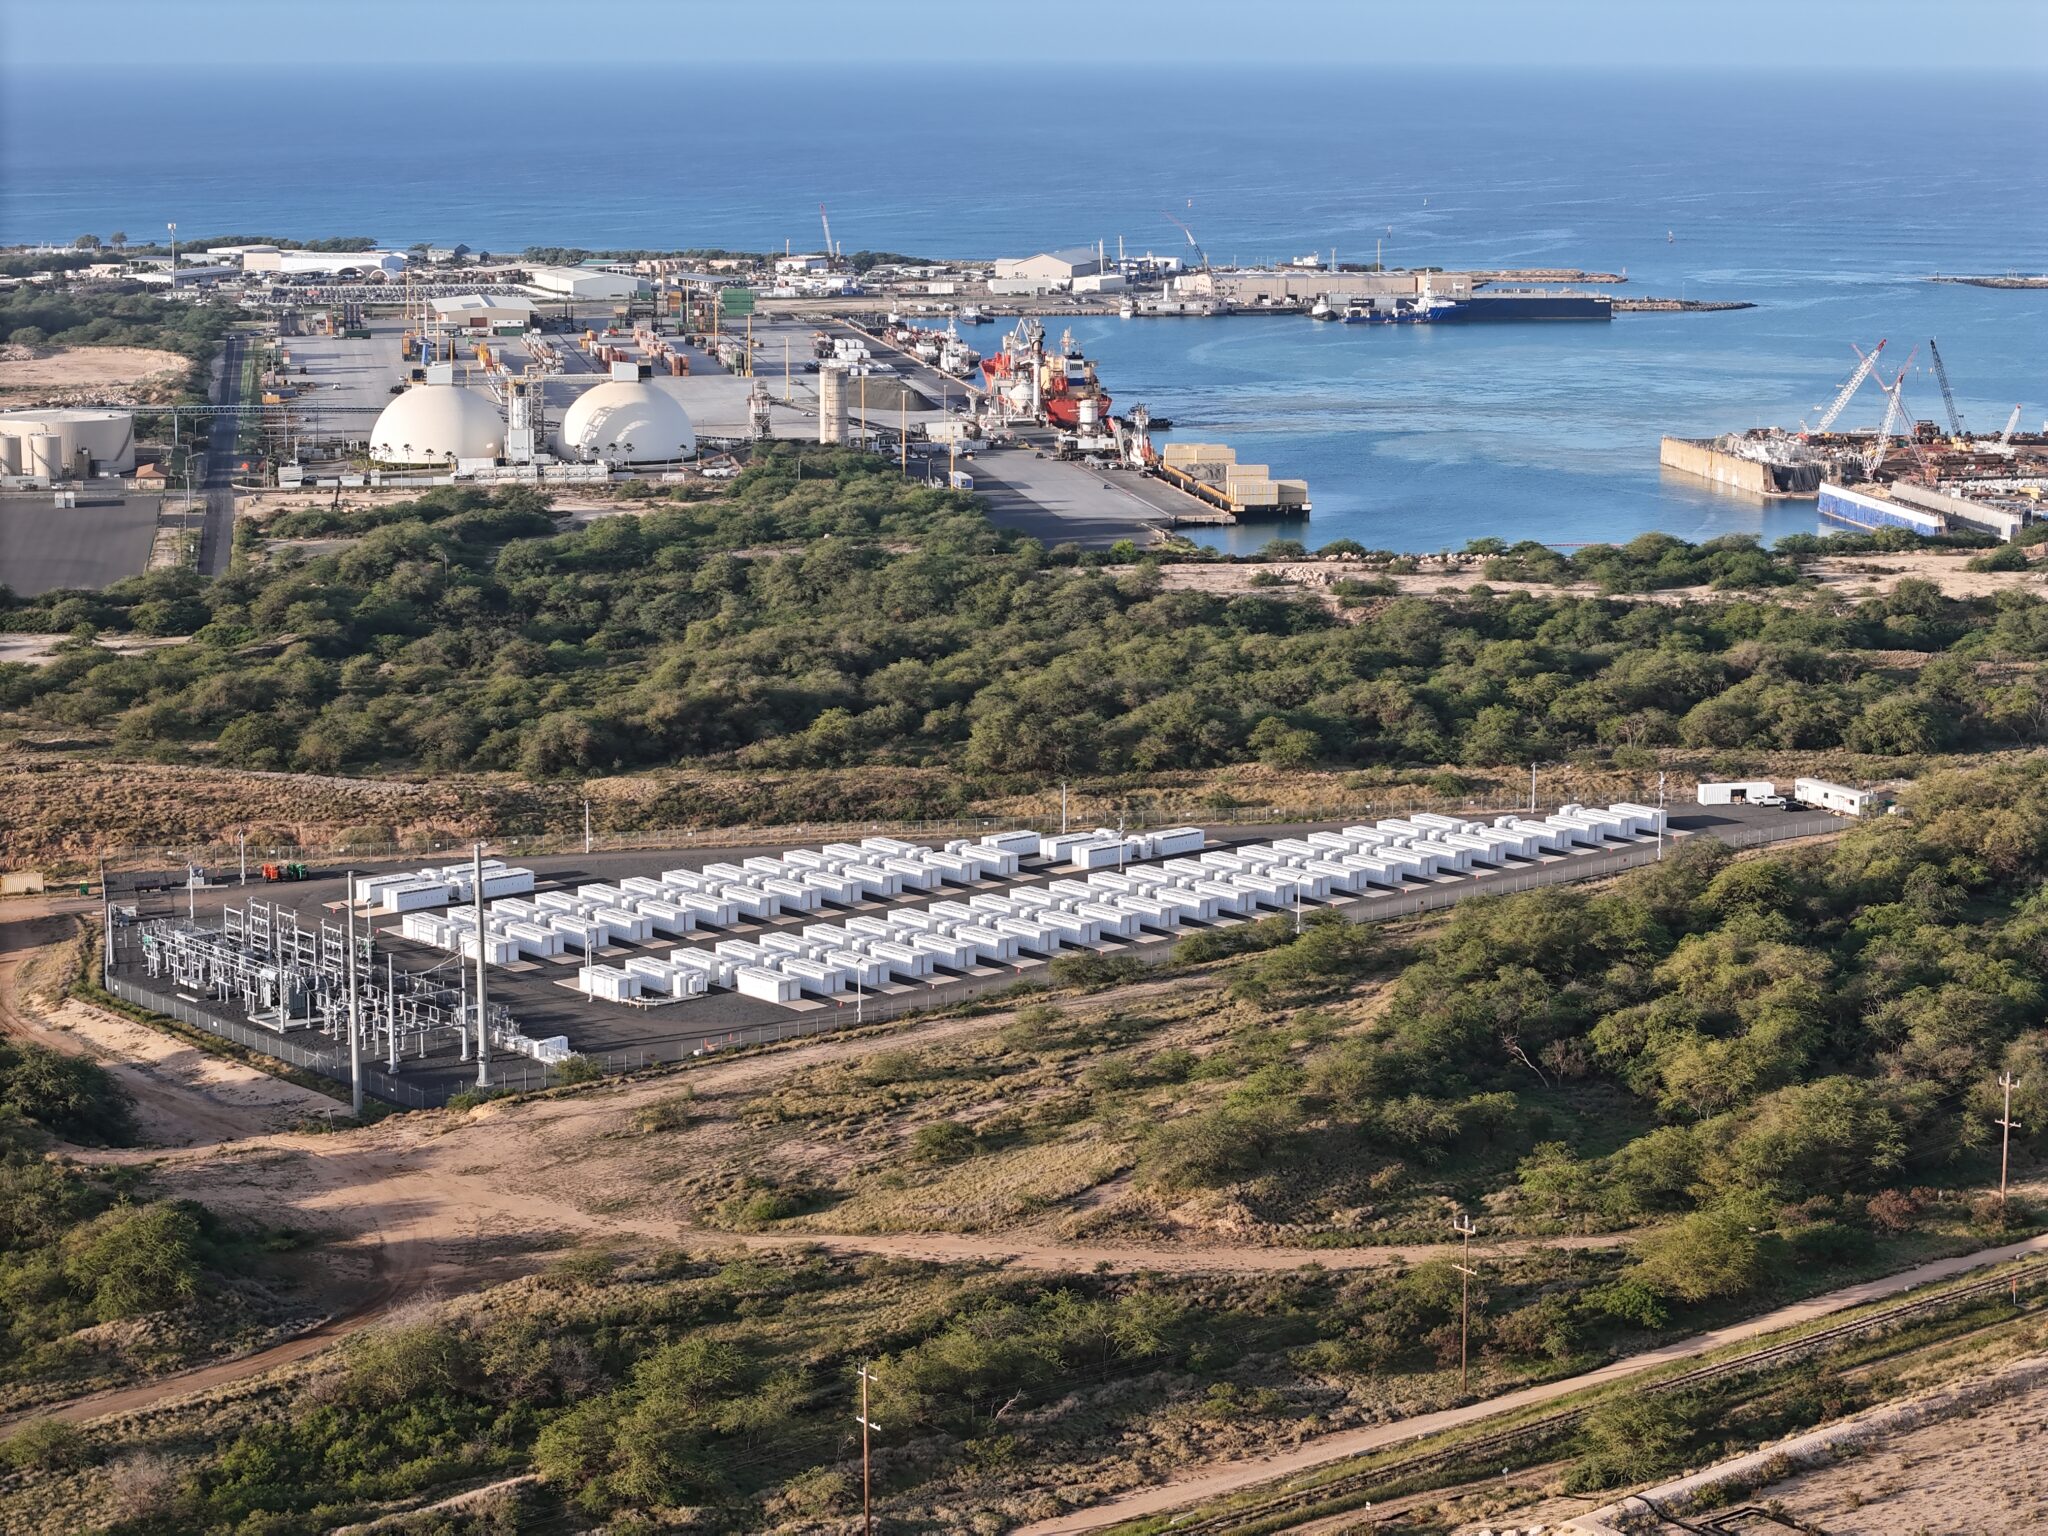 An overhead view of a battery farm next to the sea.